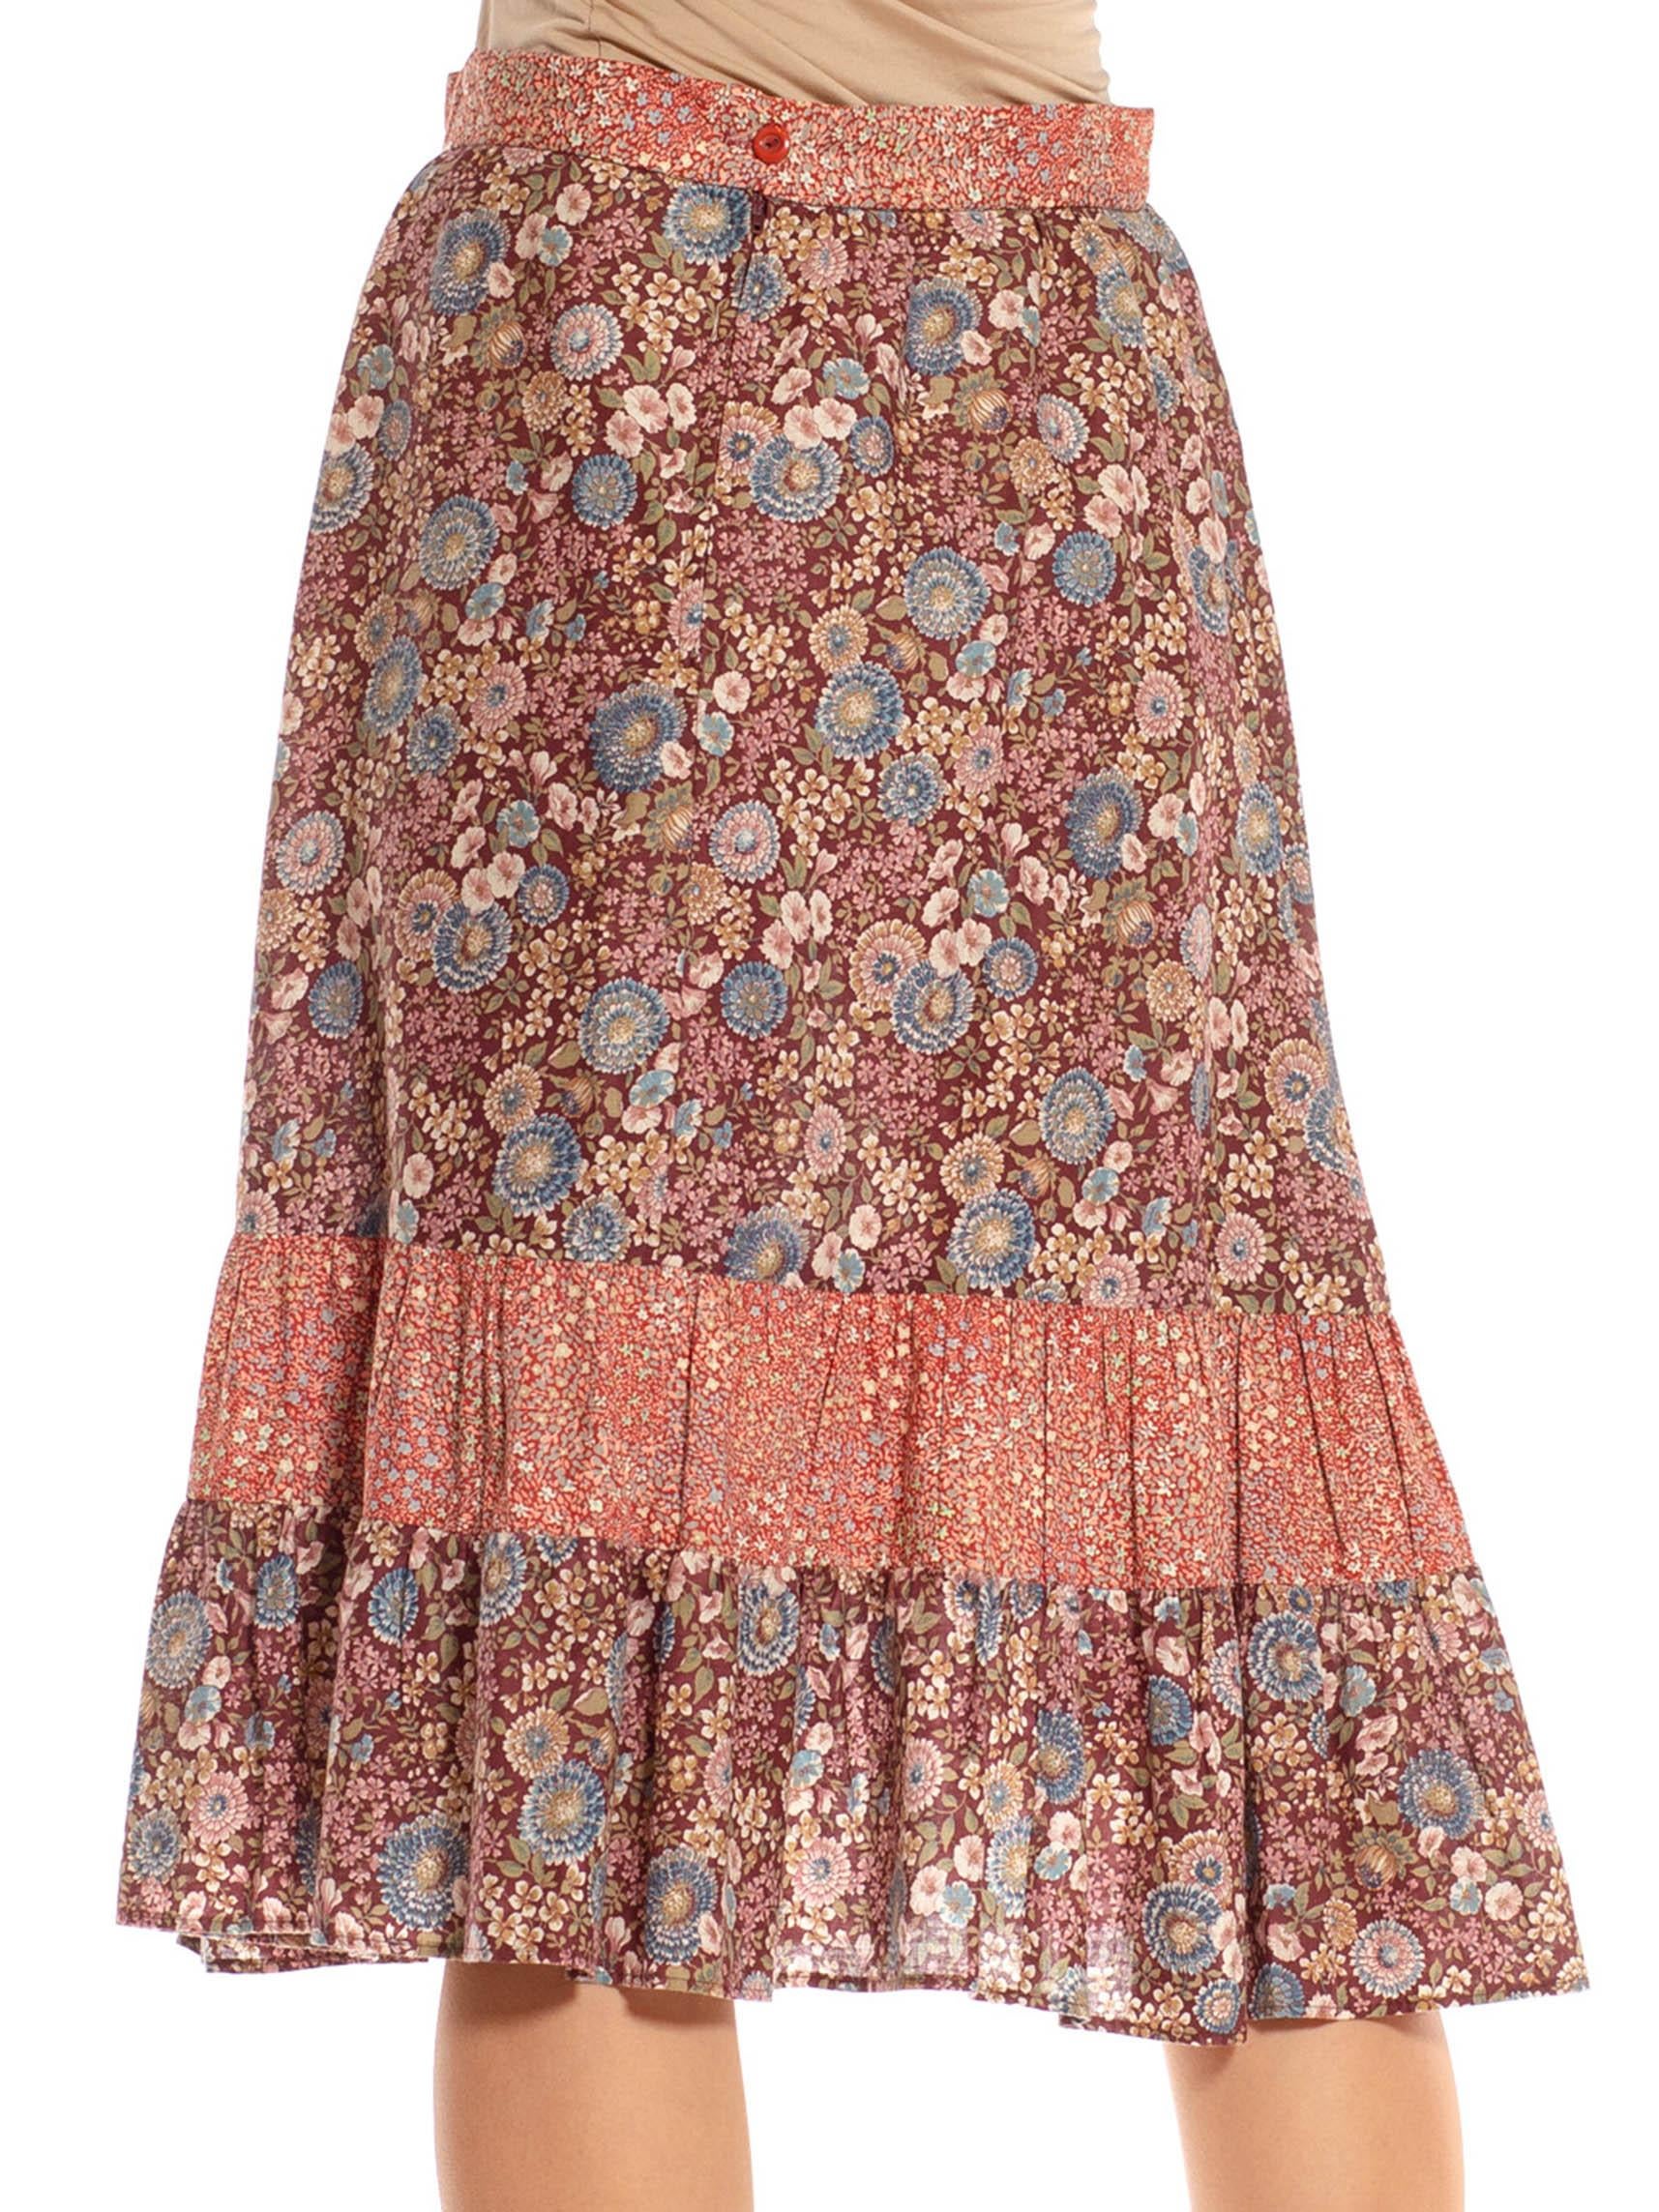 1970S Burgundy & Dusty Pink Cotton Ditsy Floral Print Mix Skirt For Sale 3